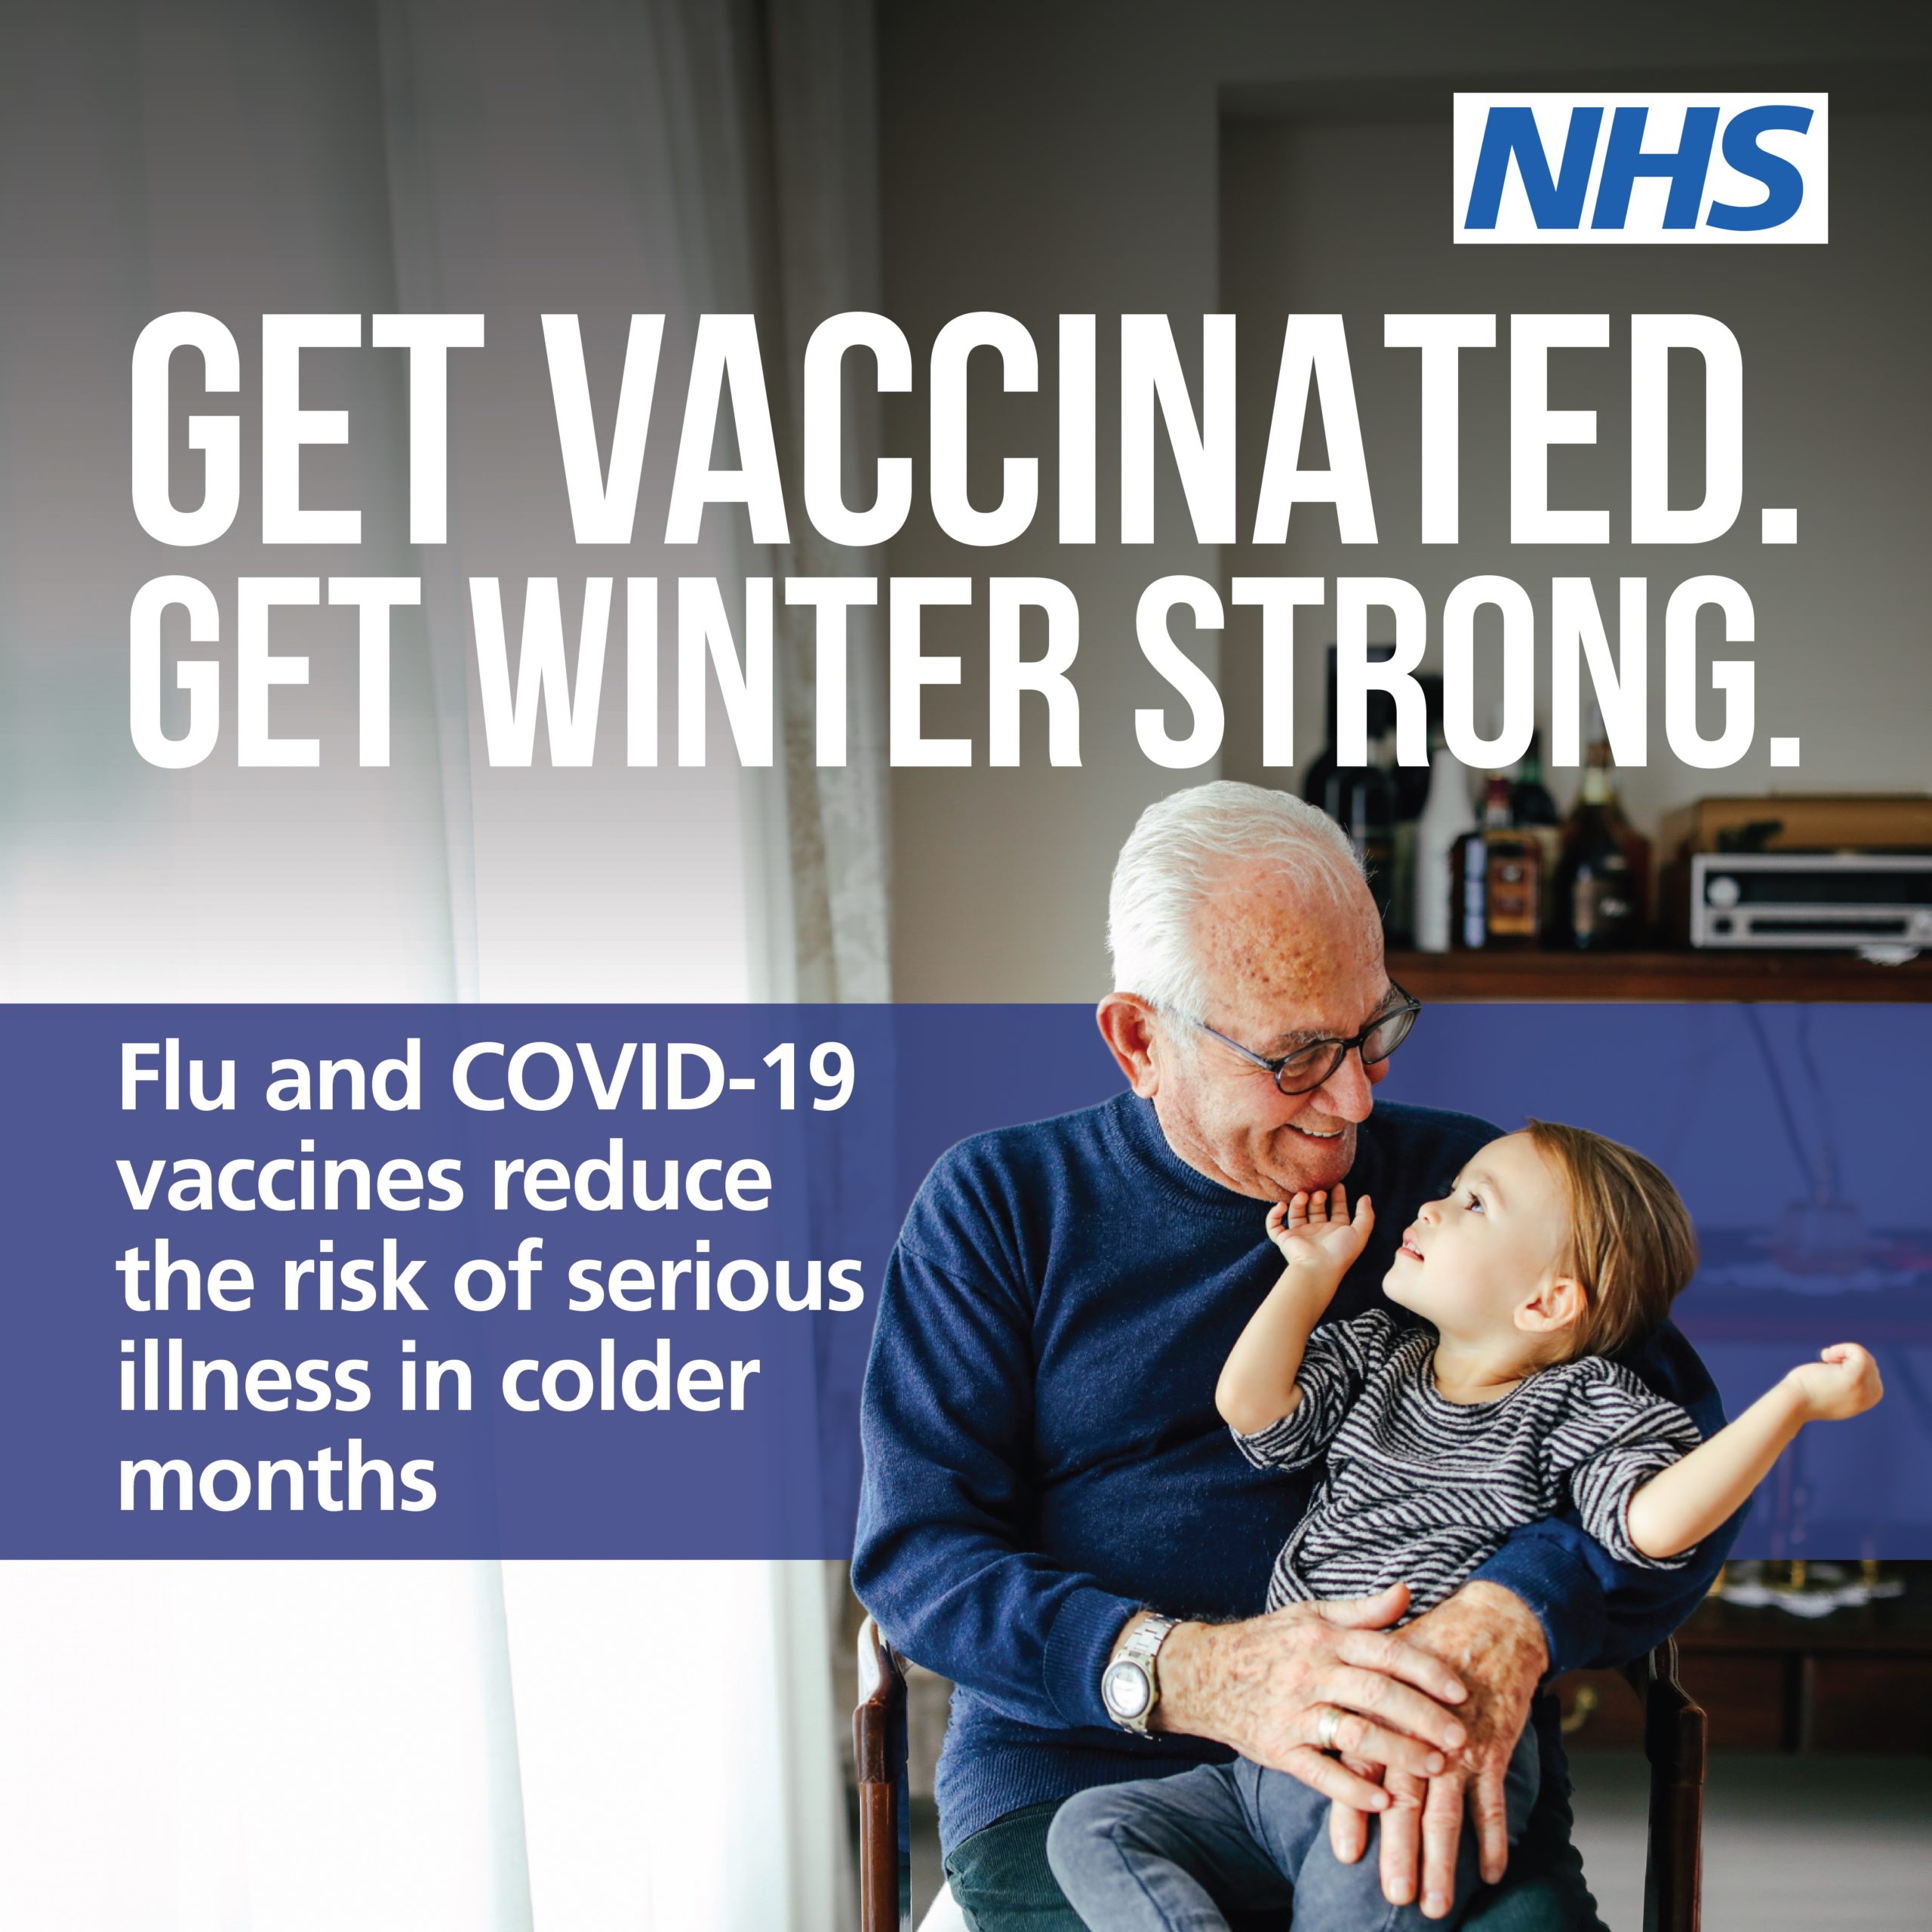 Get vaccinated. Get winter strong. Flu and Covid 19 vaccines reduce the risk of serious illness in colder months.